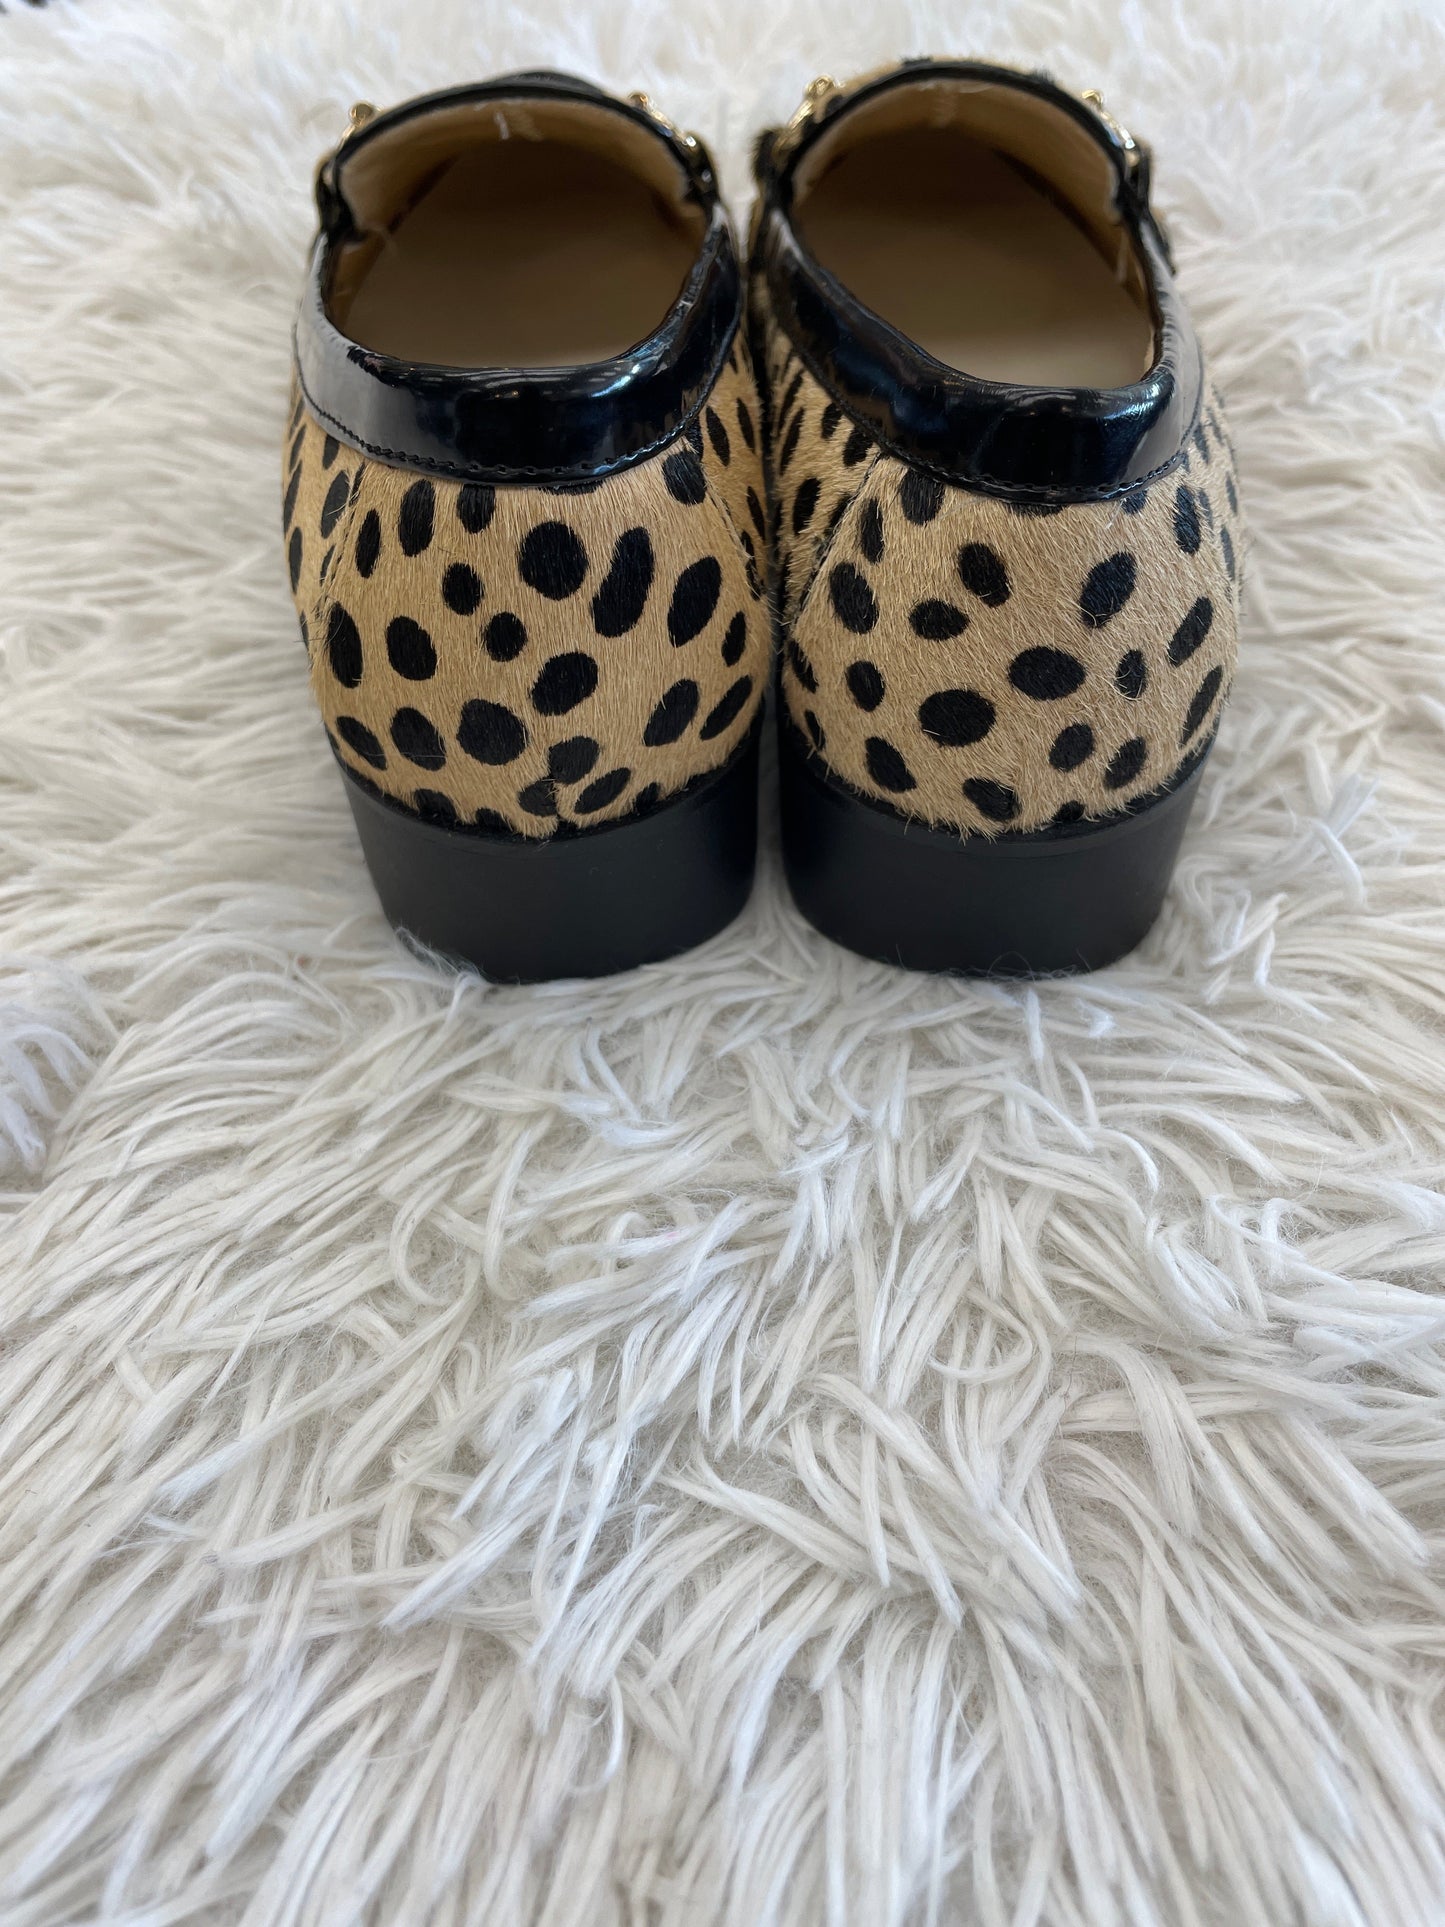 Animal Print Shoes Flats Loafer Oxford Anne Klein, Size 6